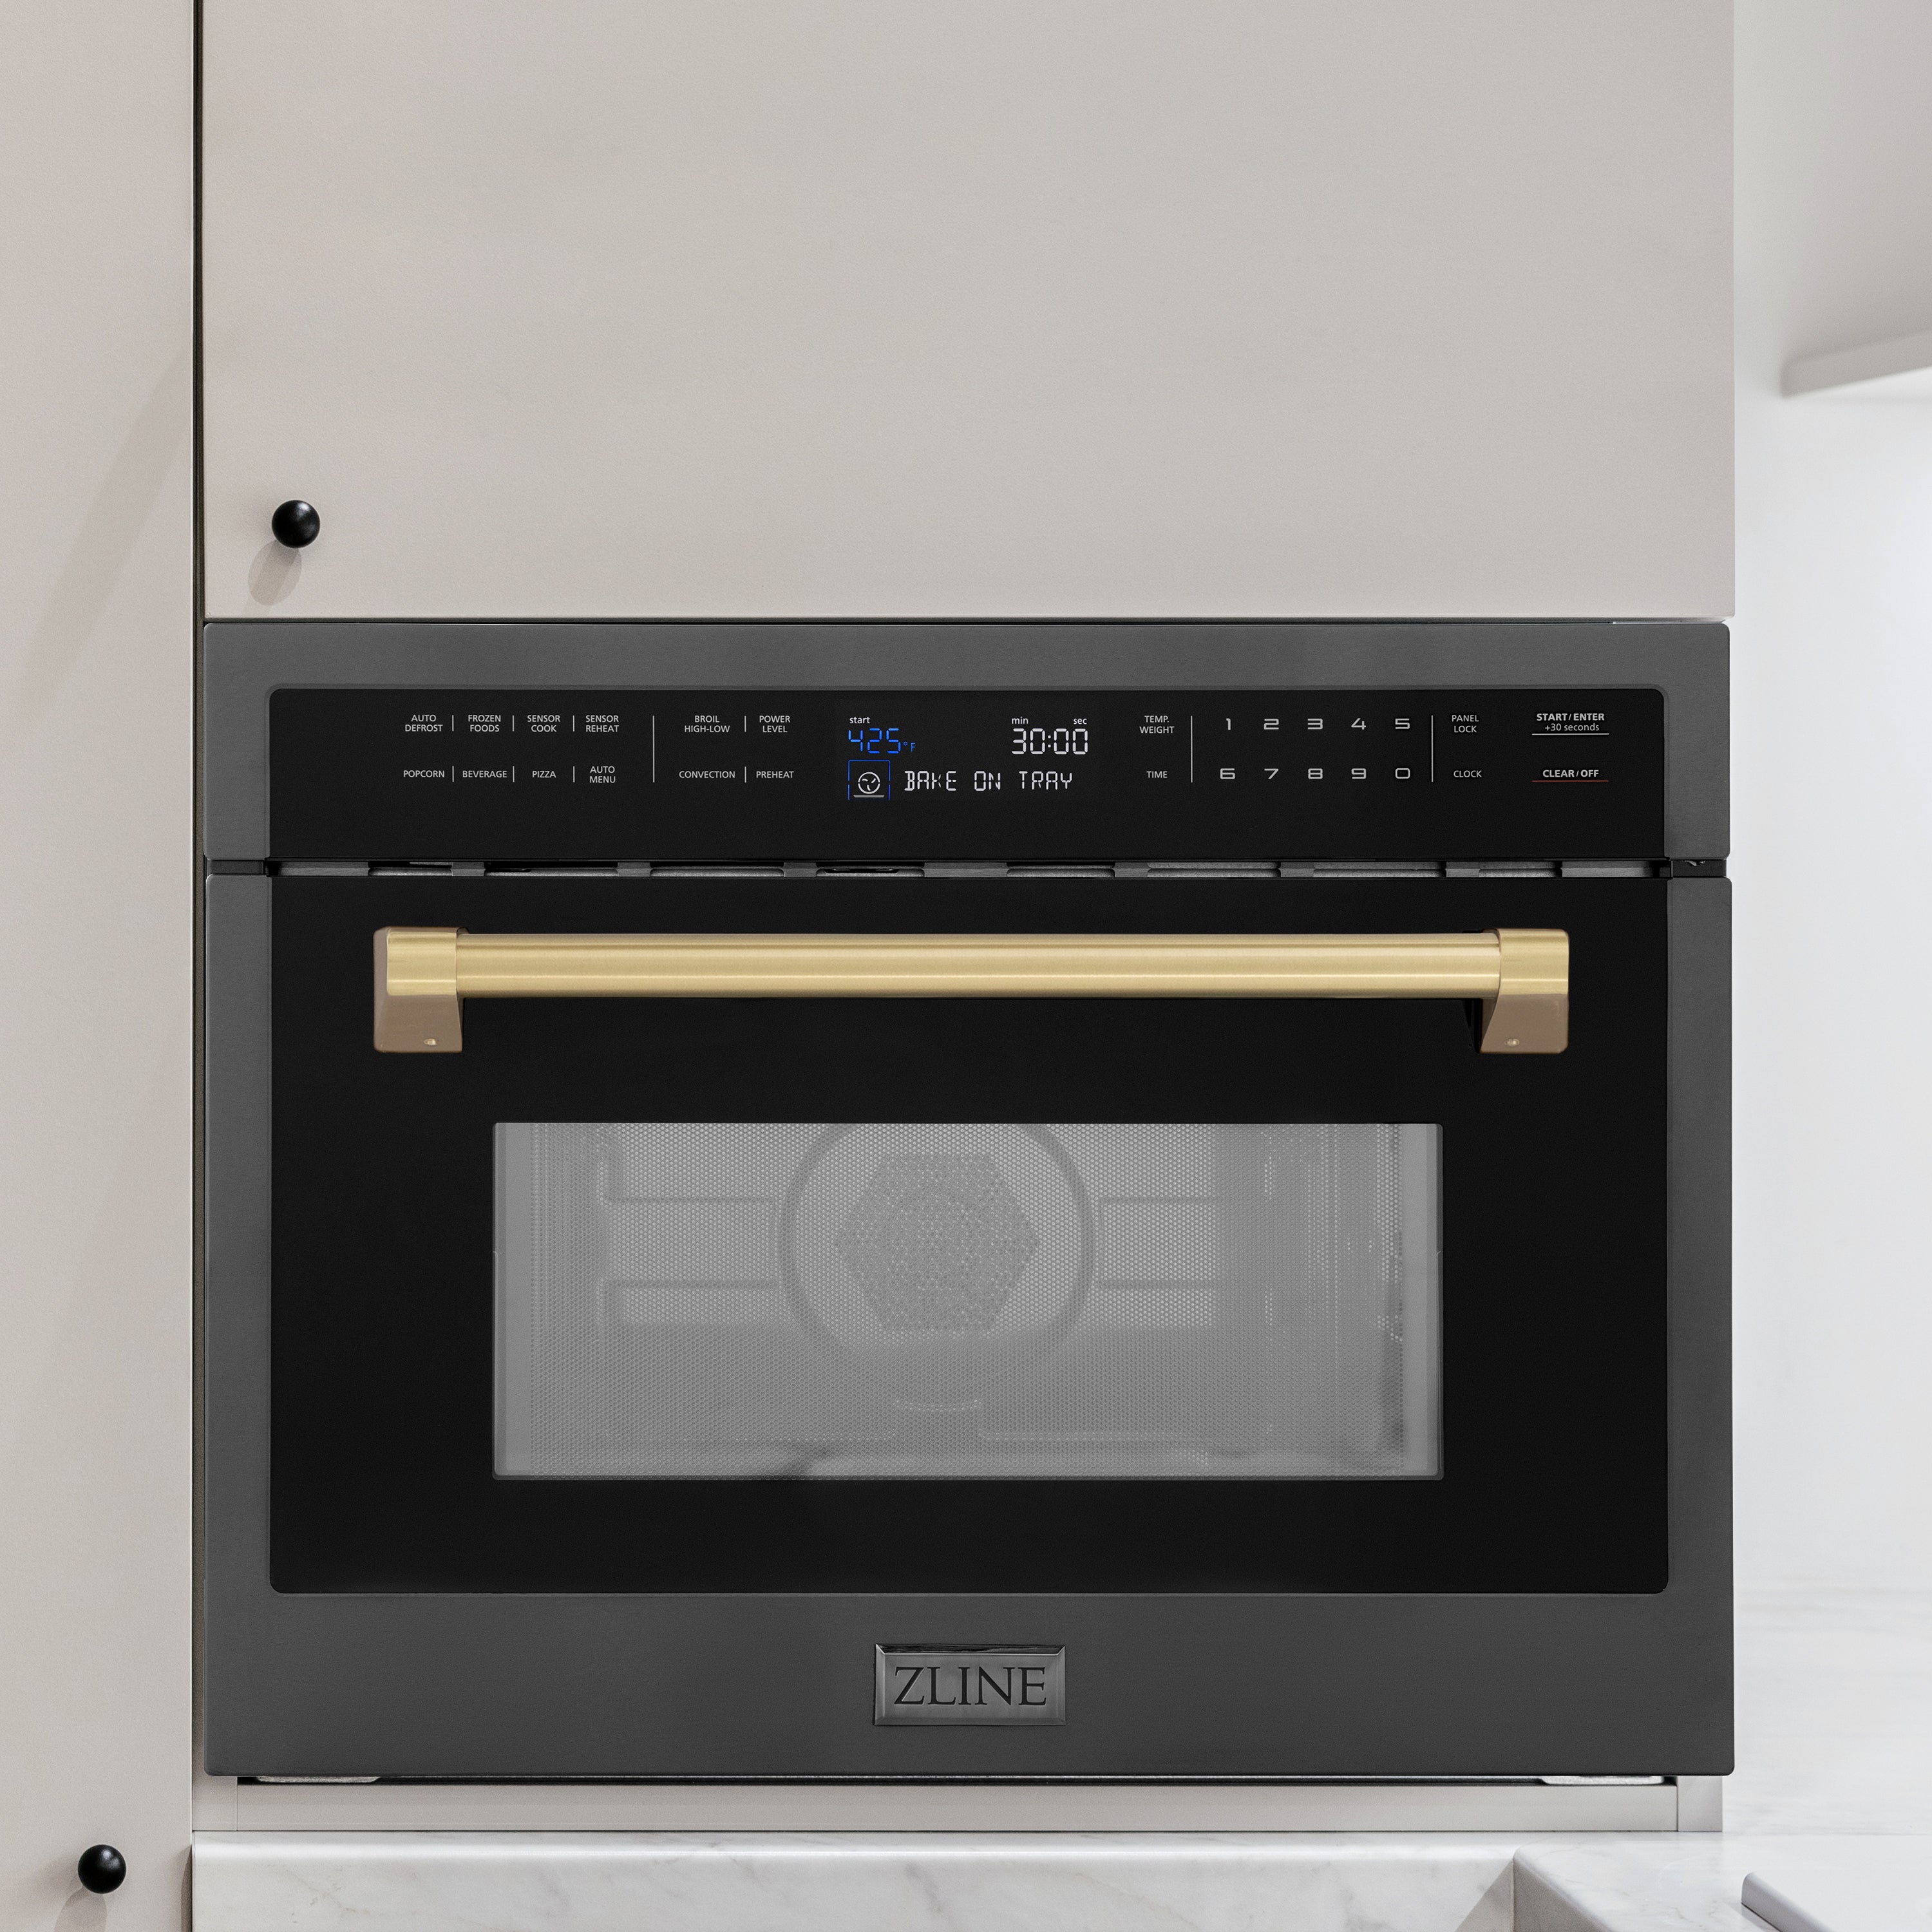 ZLINE Autograph Edition 24 in. 1.6 cu ft. Built-in Convection Microwave Oven in Black Stainless Steel with Champagne Bronze Accents (MWOZ-24-BS-CB) built-in to beige kitchen cabinetry.